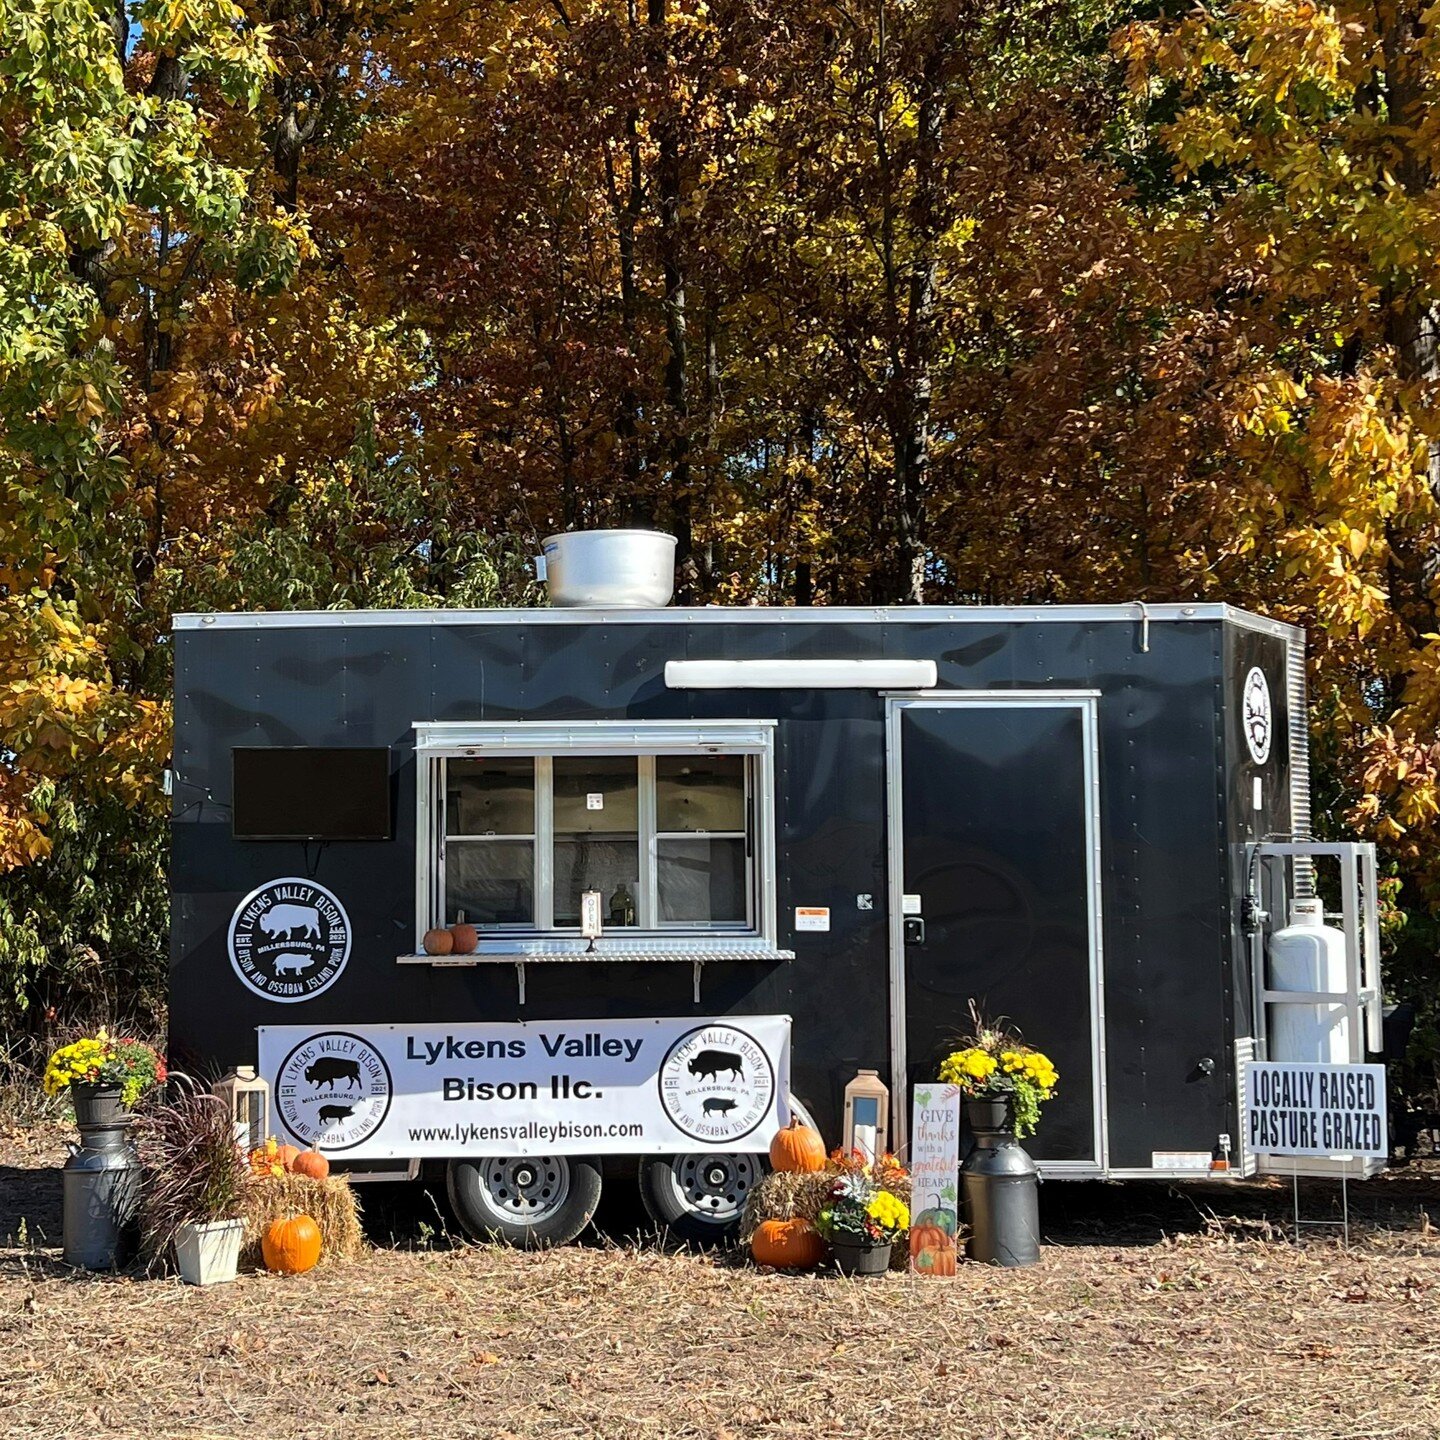 Lykens Valley Bison is happy to announce the addition of our food trailer! Watch for our up-and-coming locations and menu. Hope to see you there!
 
#smuckergardens#armstrongvalleywinery#farmtotable#bison#americanbison#millersburgpa#